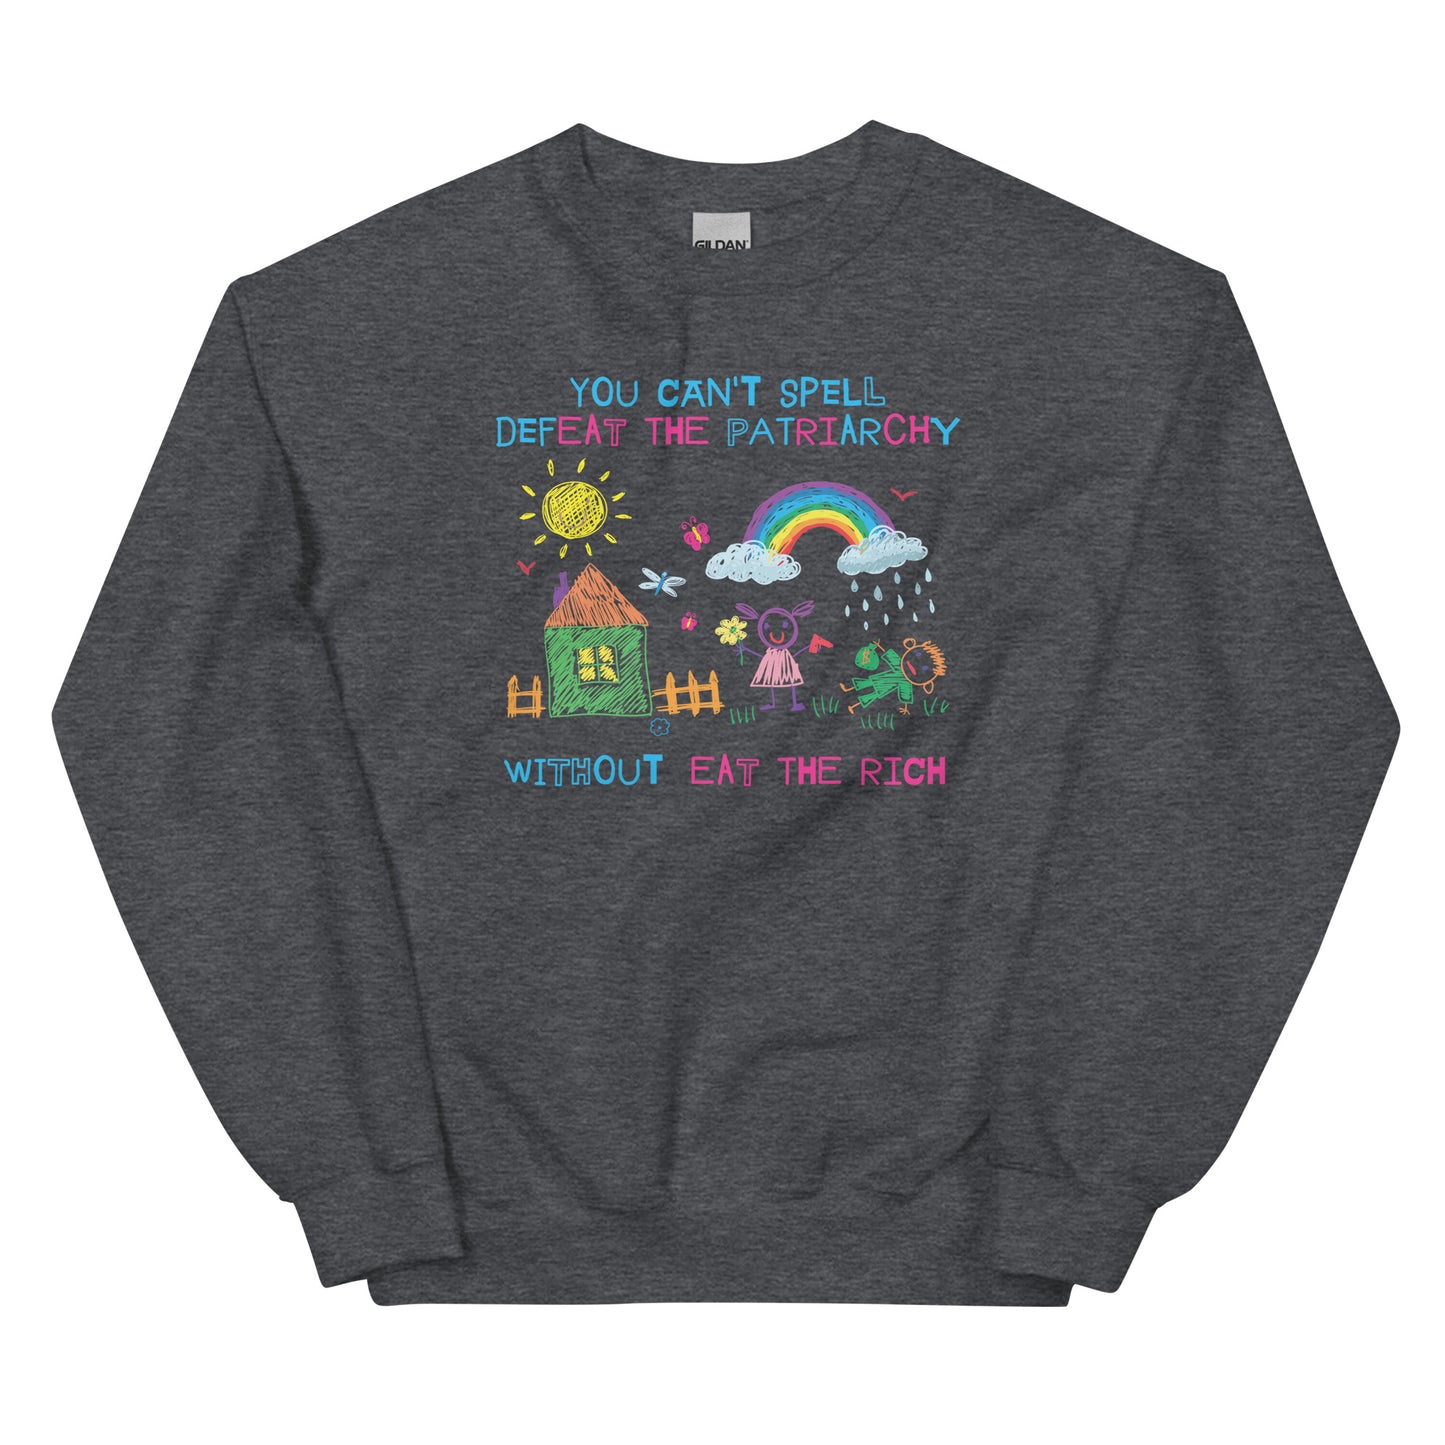 You Can't Spell Defeat the Patriarchy Without Eat the Rich Unisex Sweatshirt